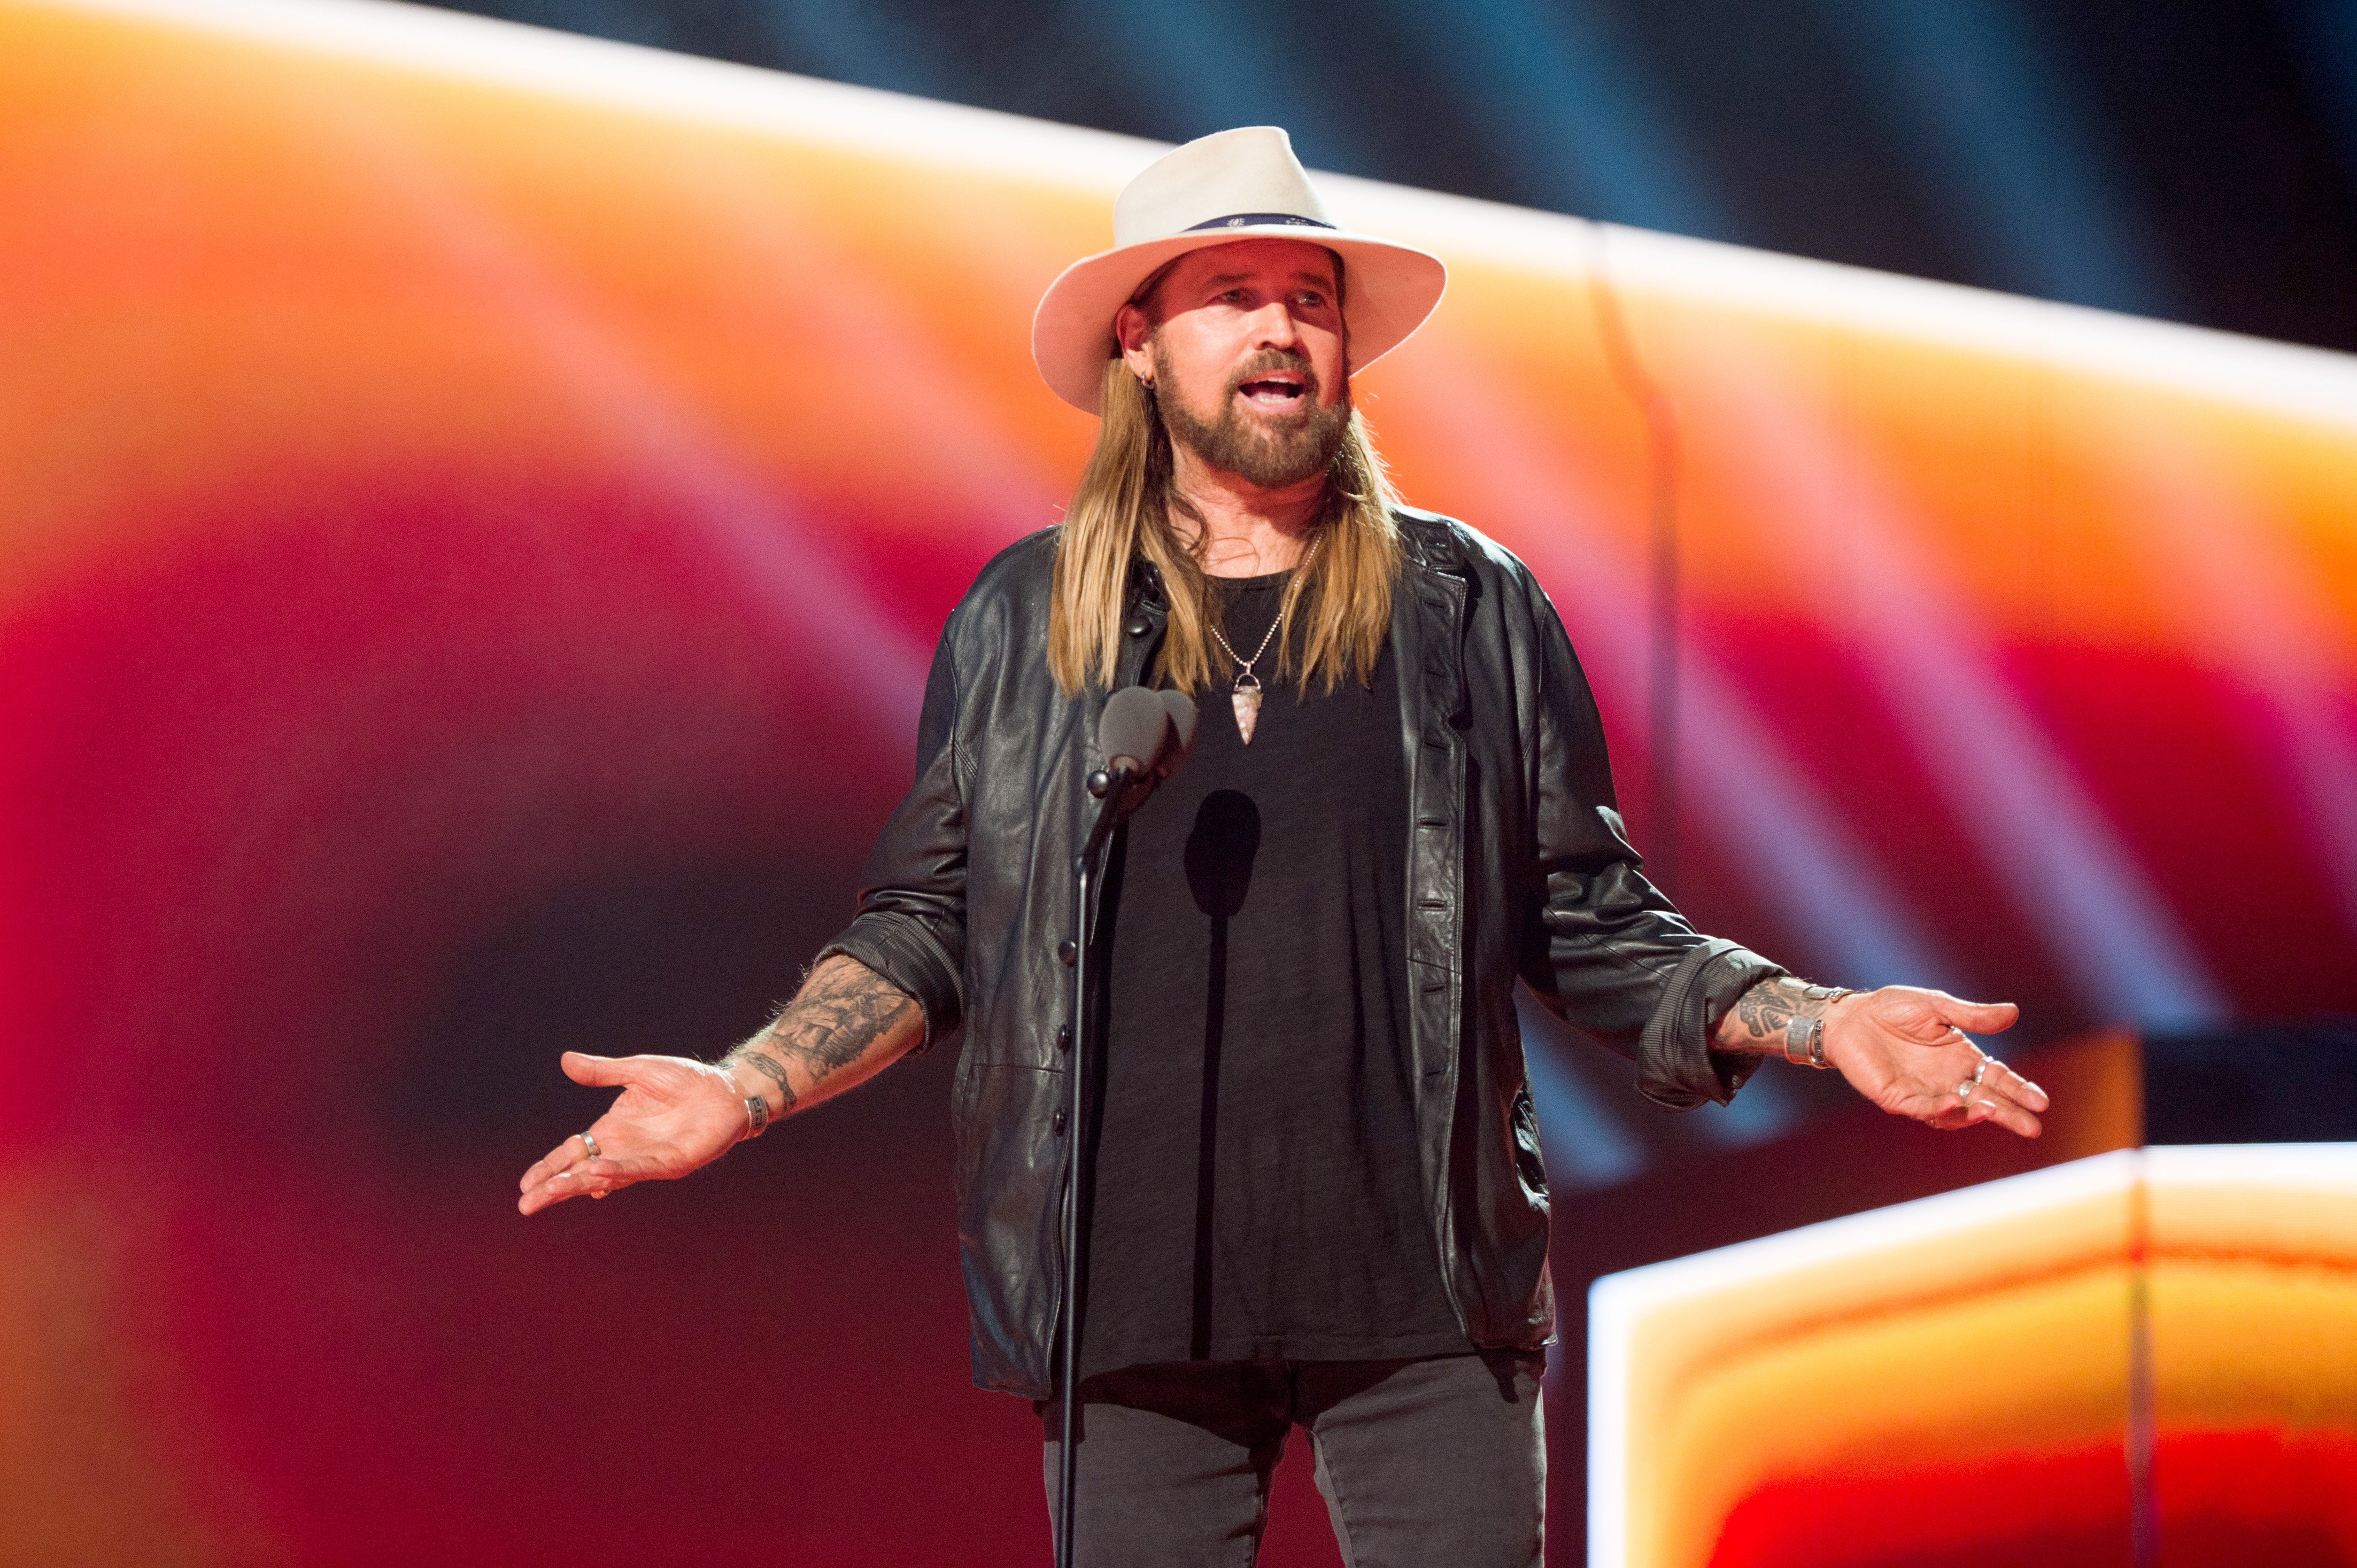 Billy Ray Cyrus at the 2019 MTV Video Music Awards at Prudential Center in Newark, New Jersey on August 26, 2019 | Source: Getty Images